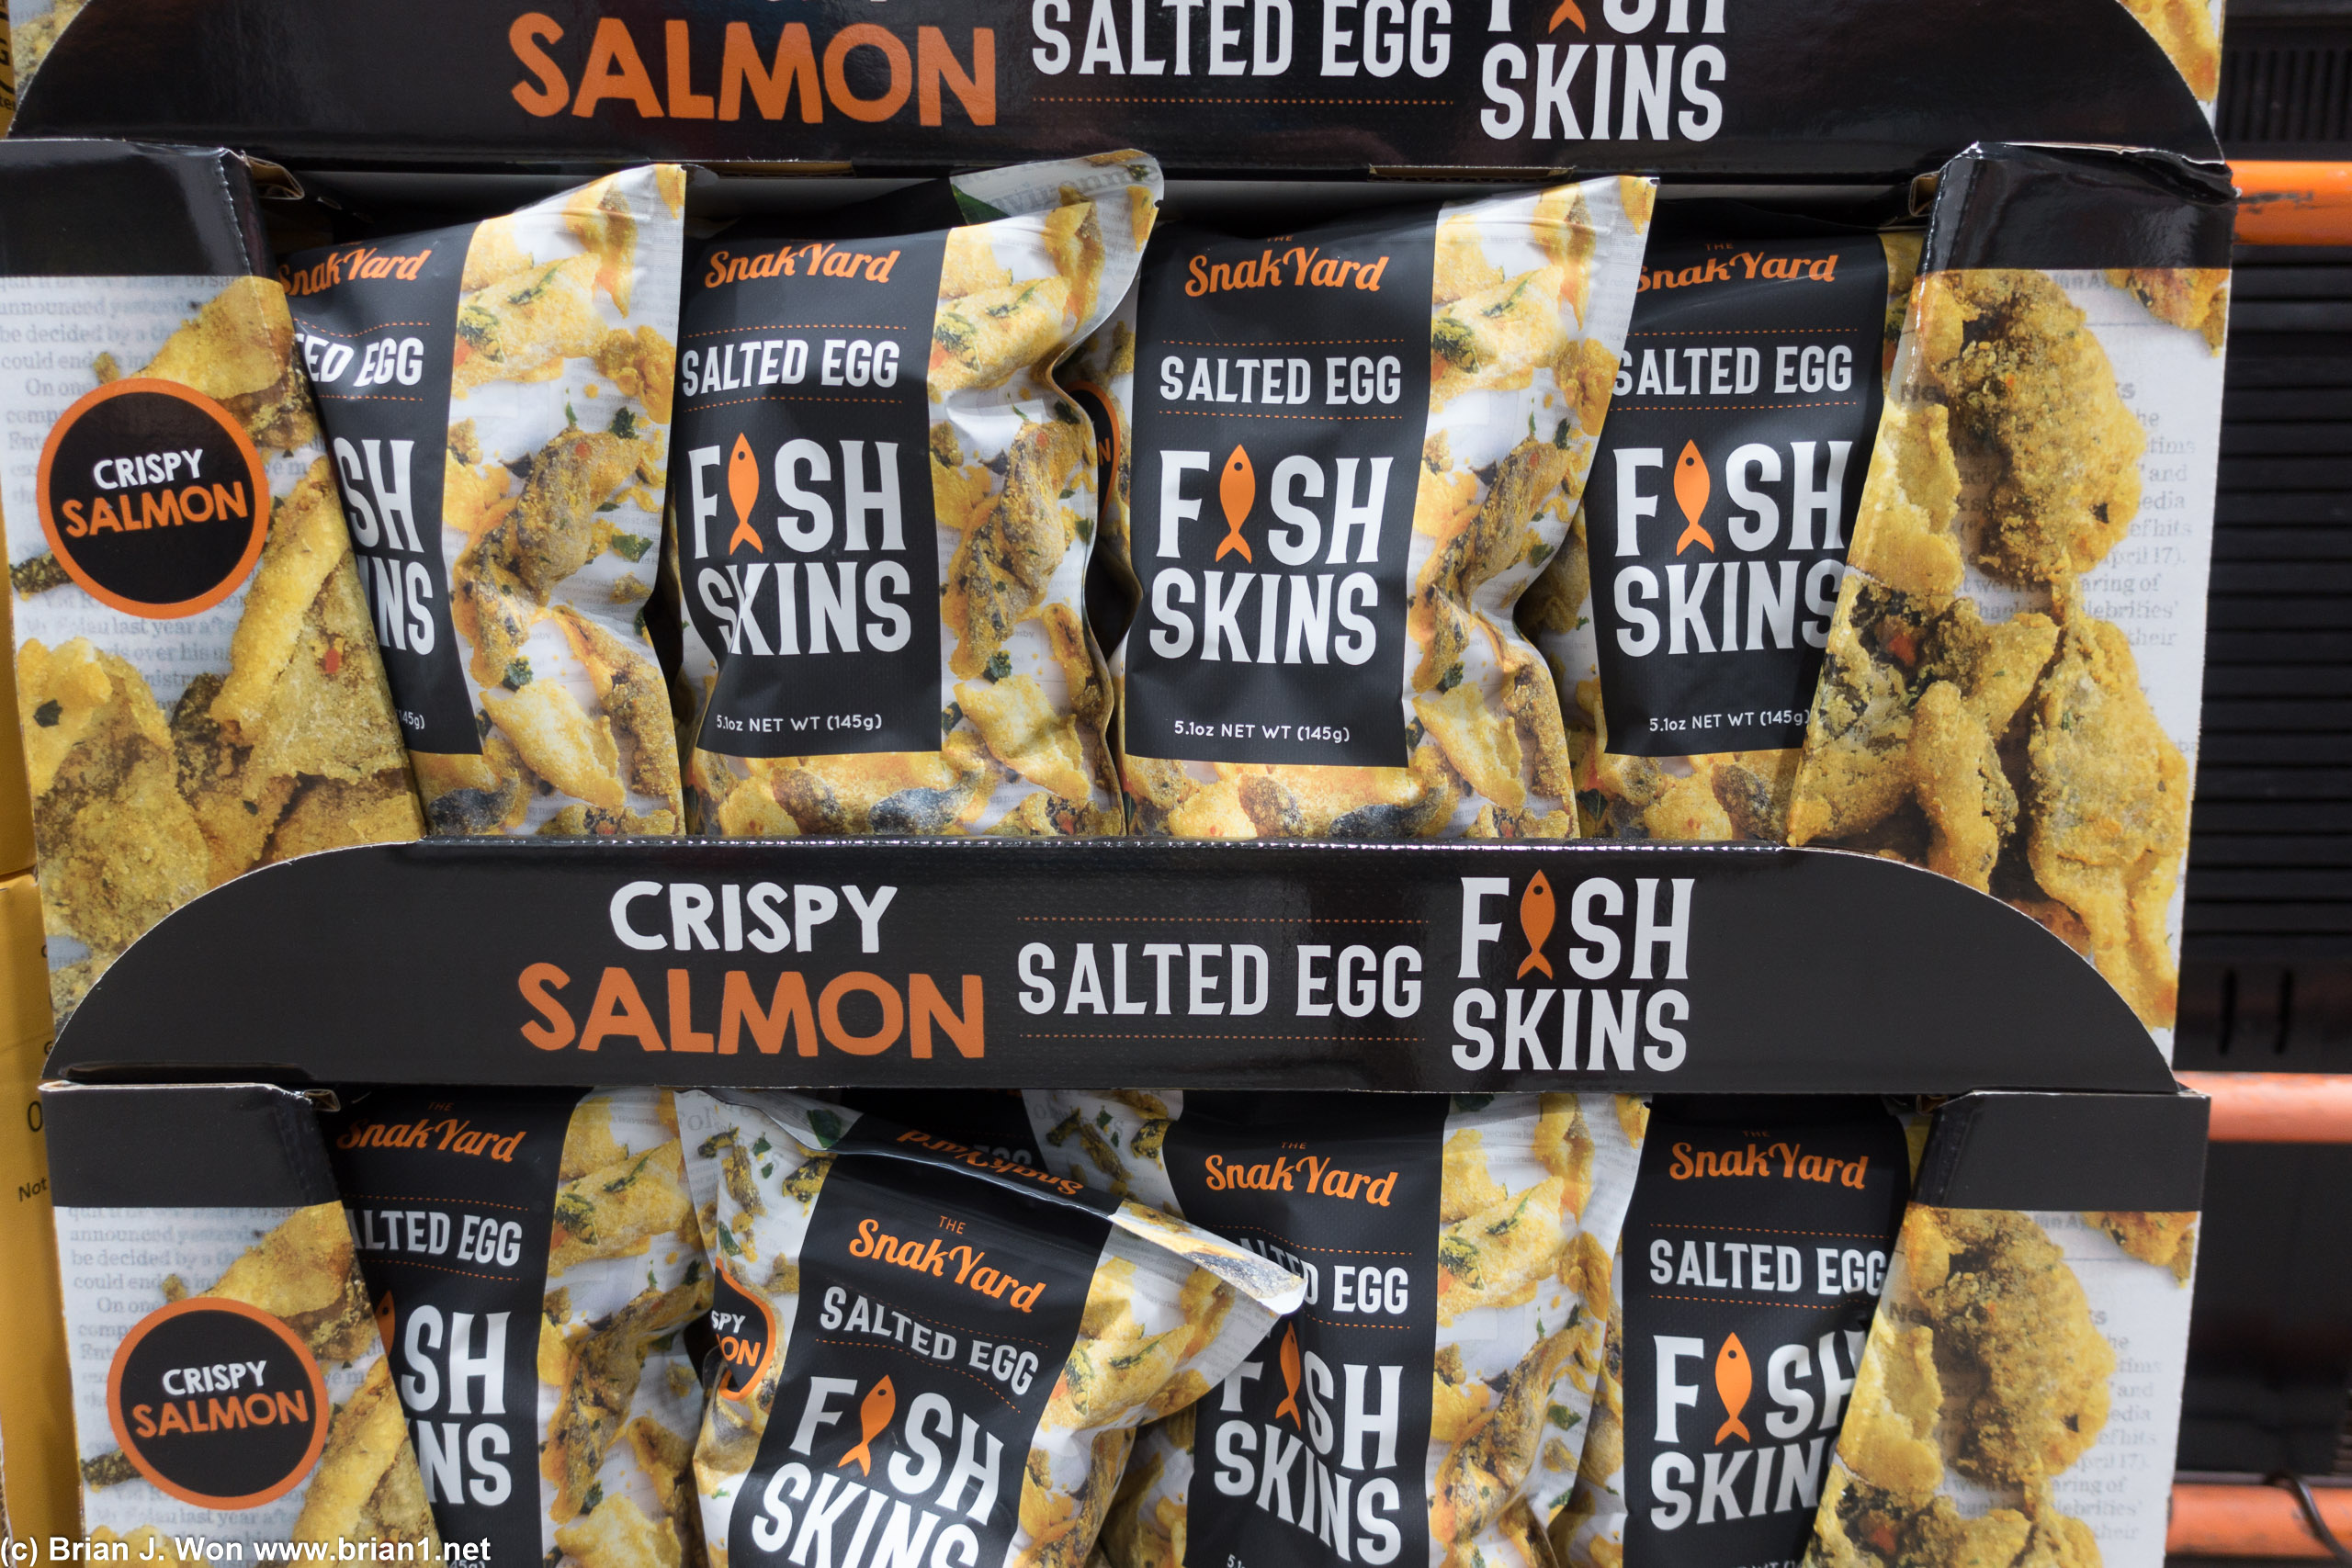 Salted egg fish skins now as well??